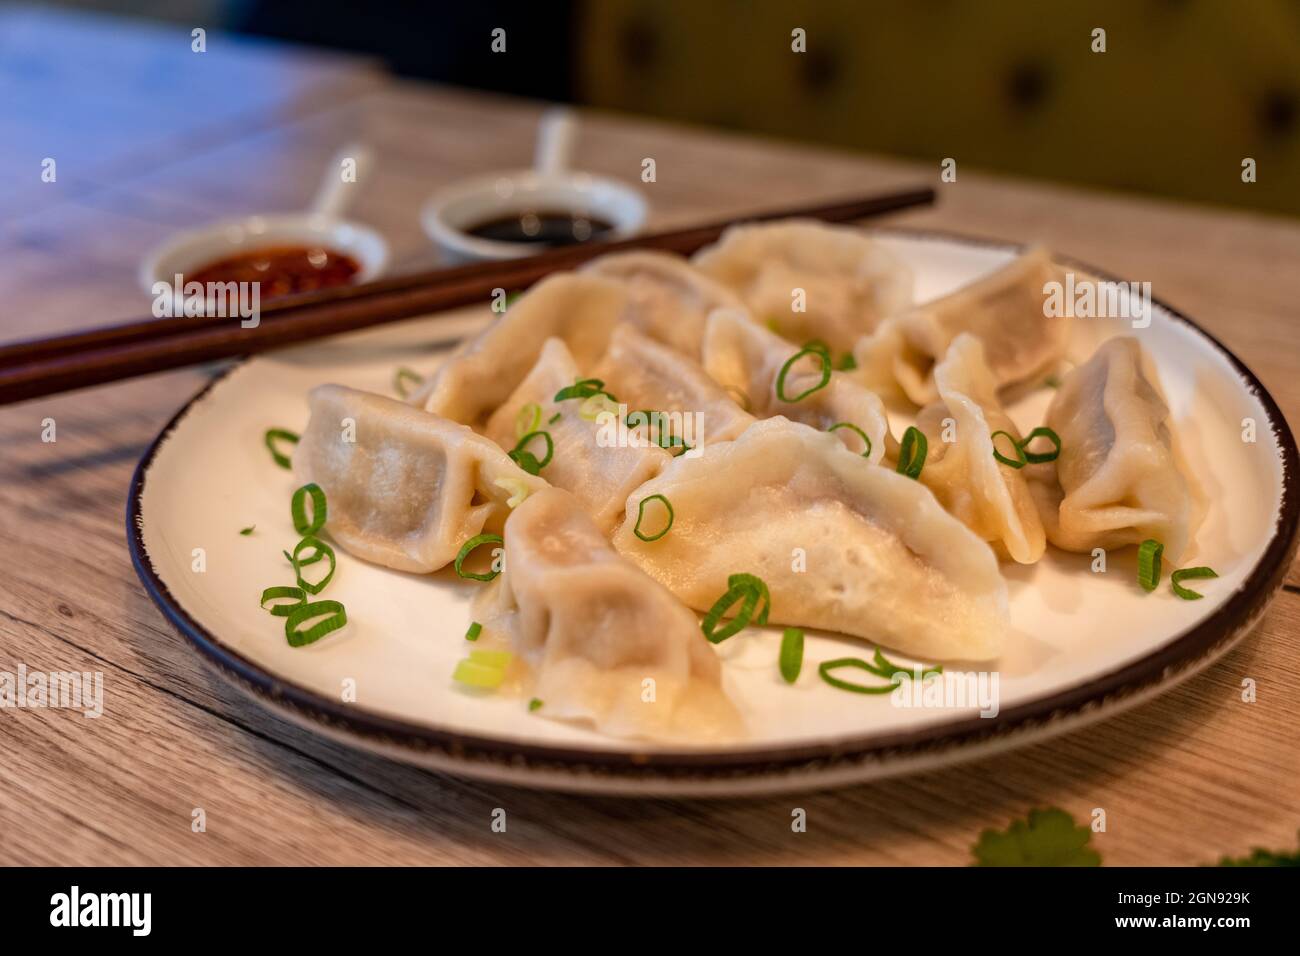 Boiled beef dumplings, traditional Chinese dish Stock Photo